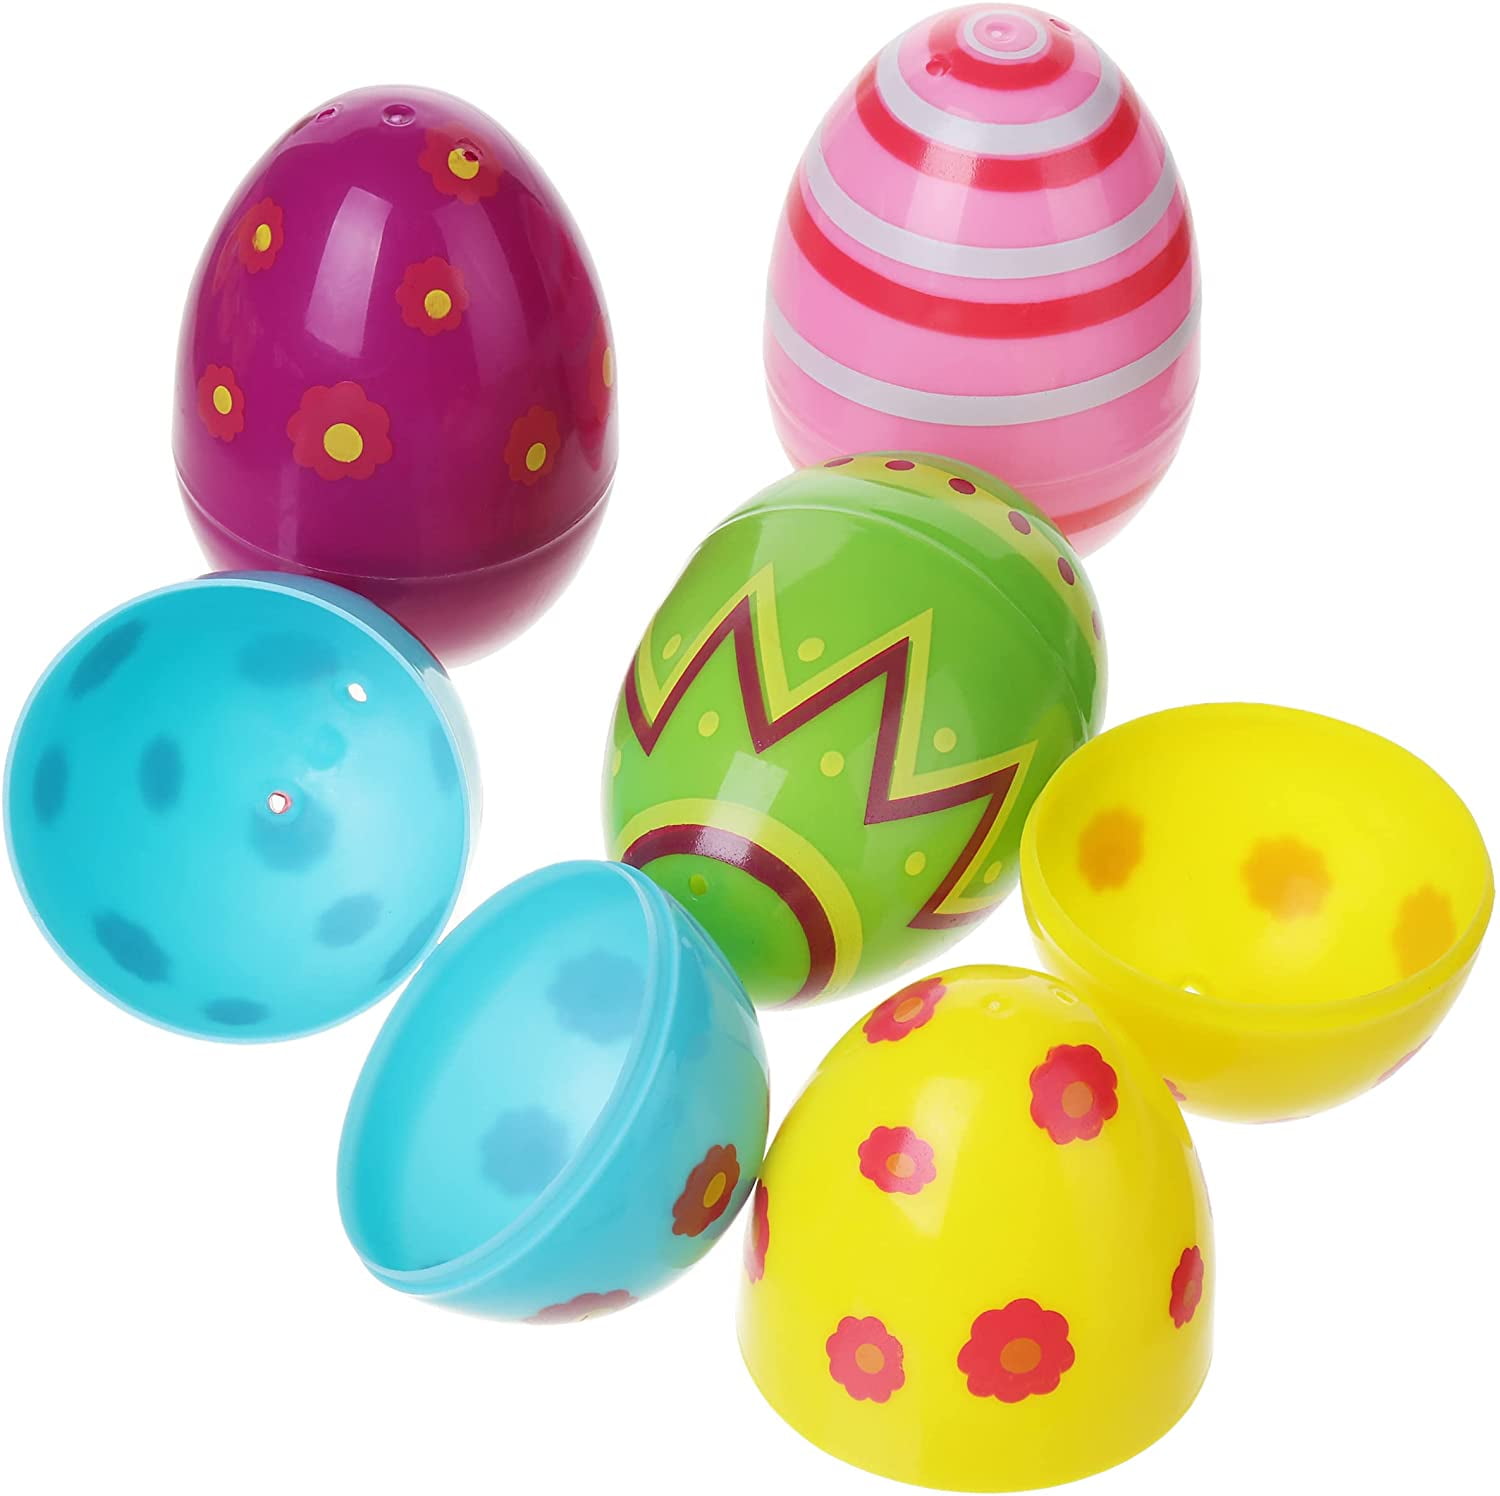 BEST PRICE FASTEST SHIP!! 24 EMPTY PINK PLASTIC EASTER VENDING EGGS 2.25 INCH 